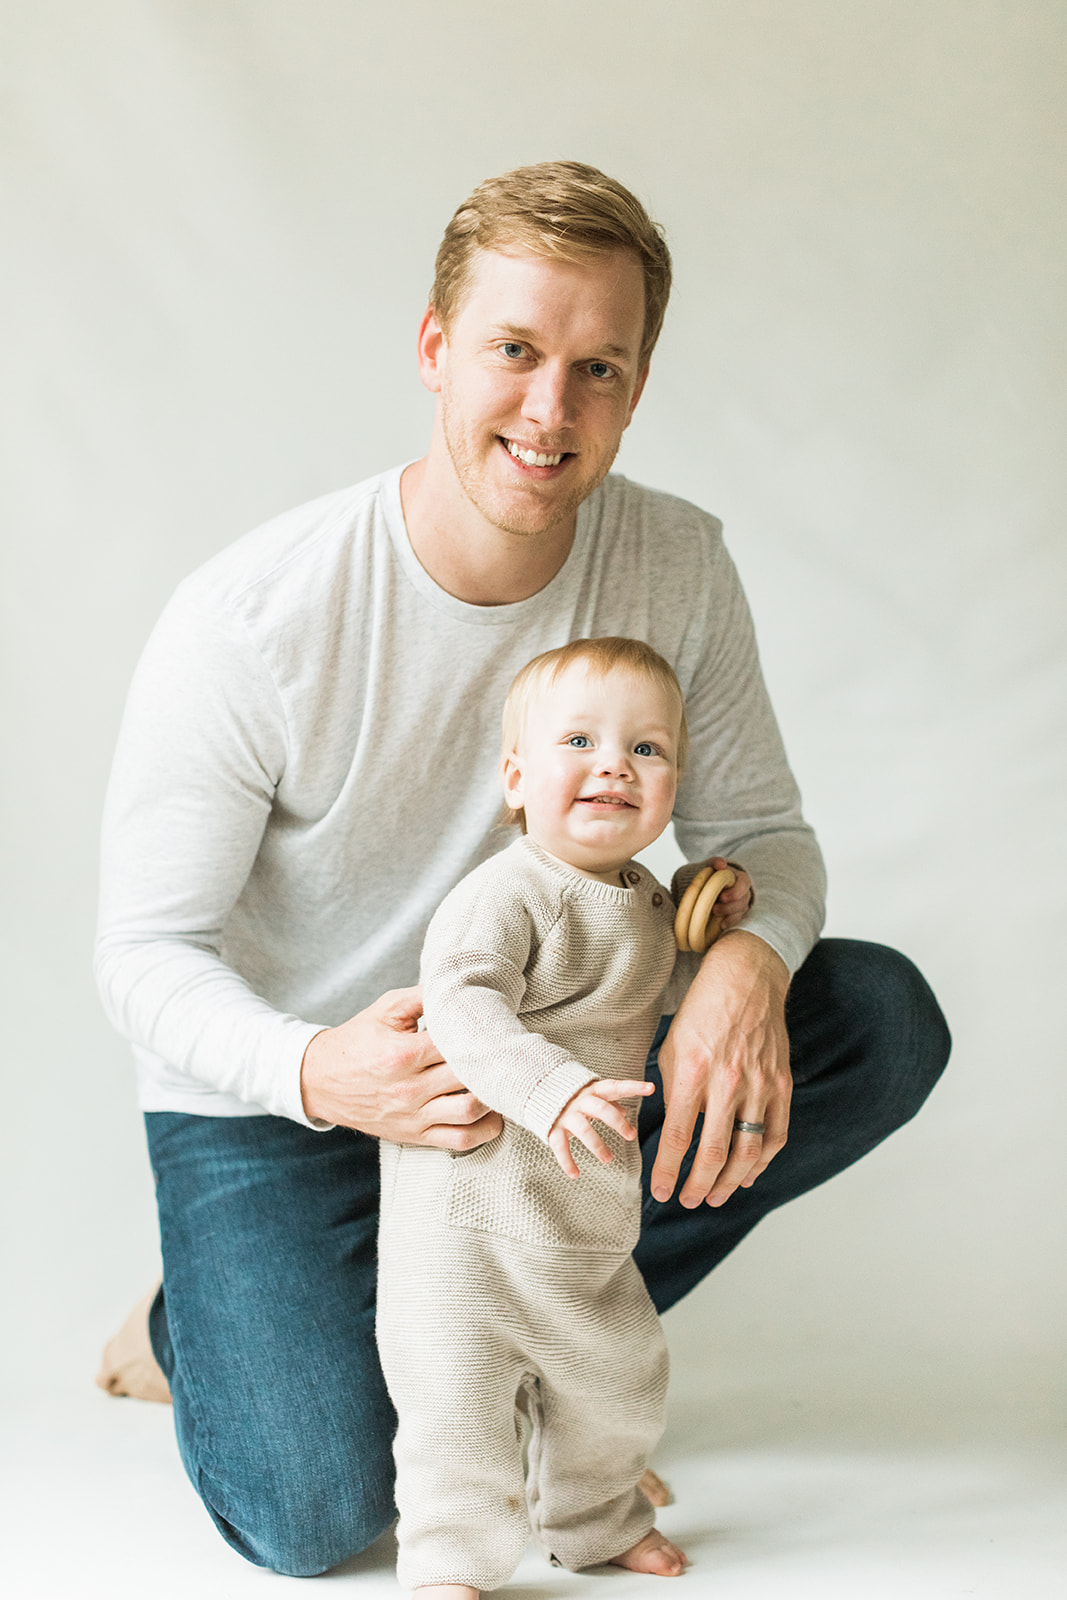 1 year old photo shoot in nashville tennessee. dad with 1 year old son